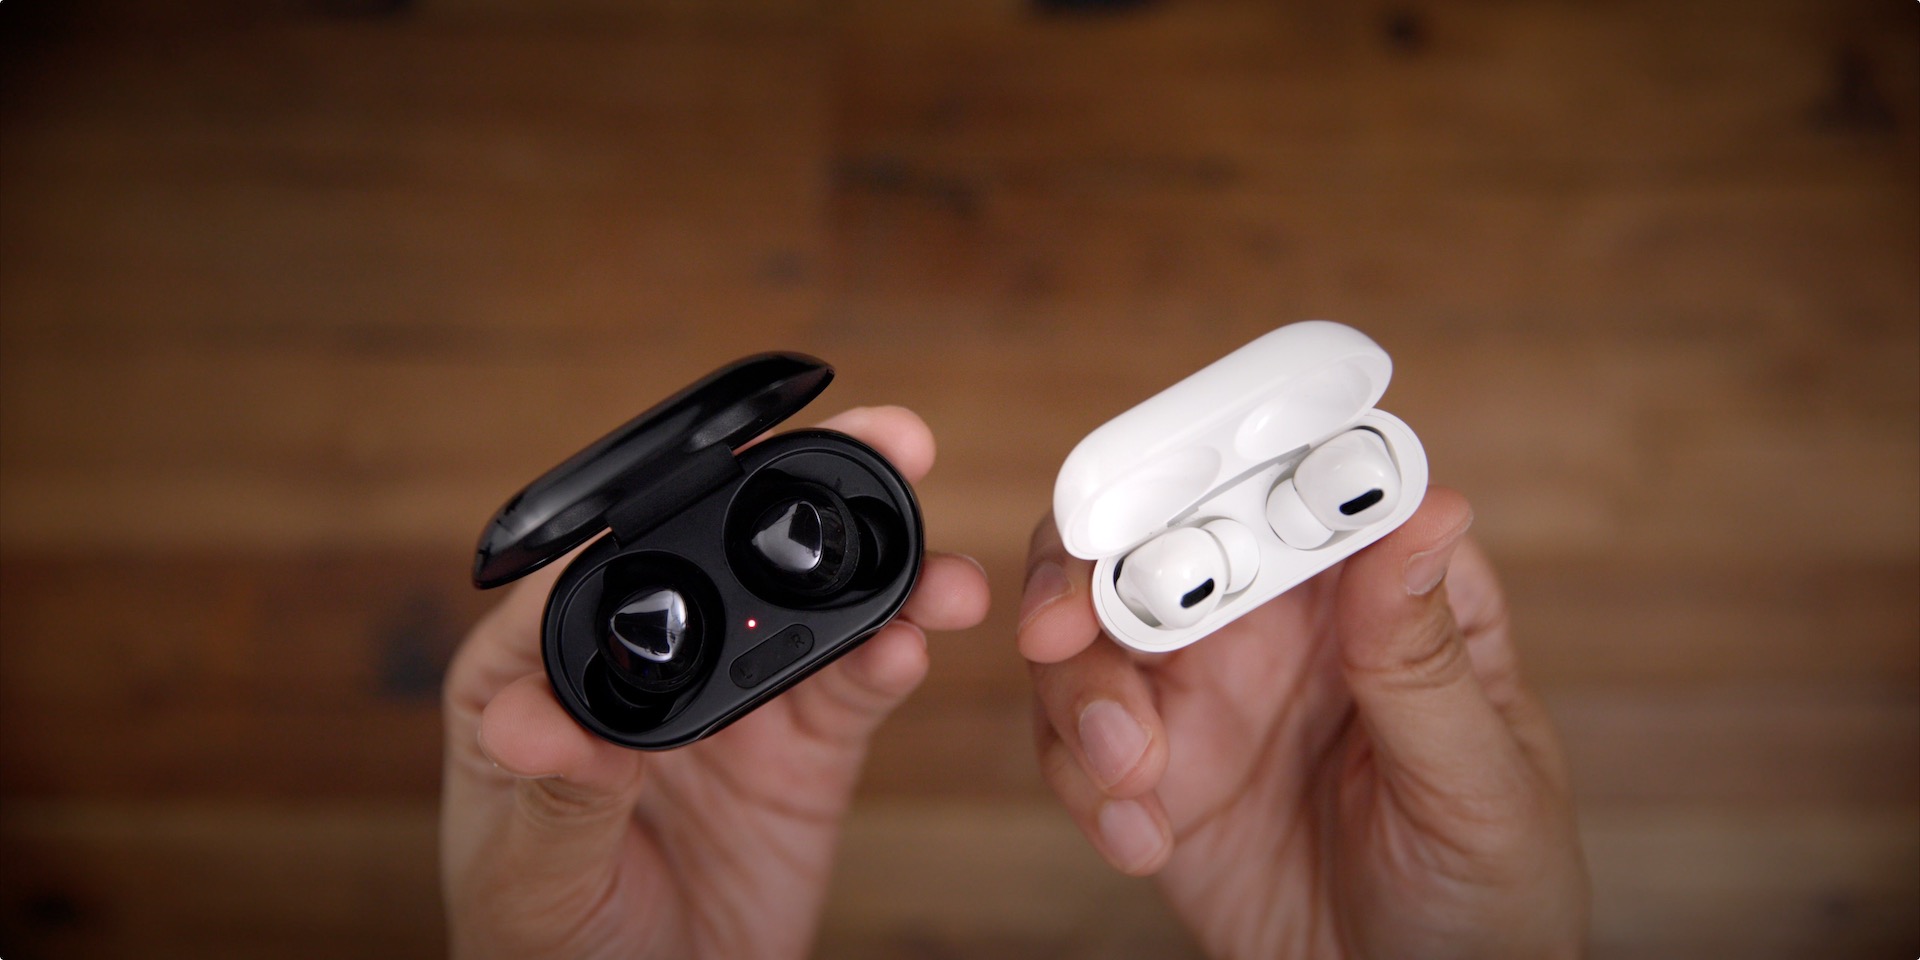 Galaxy Buds+ review: Samsung's AirPods killers are now for